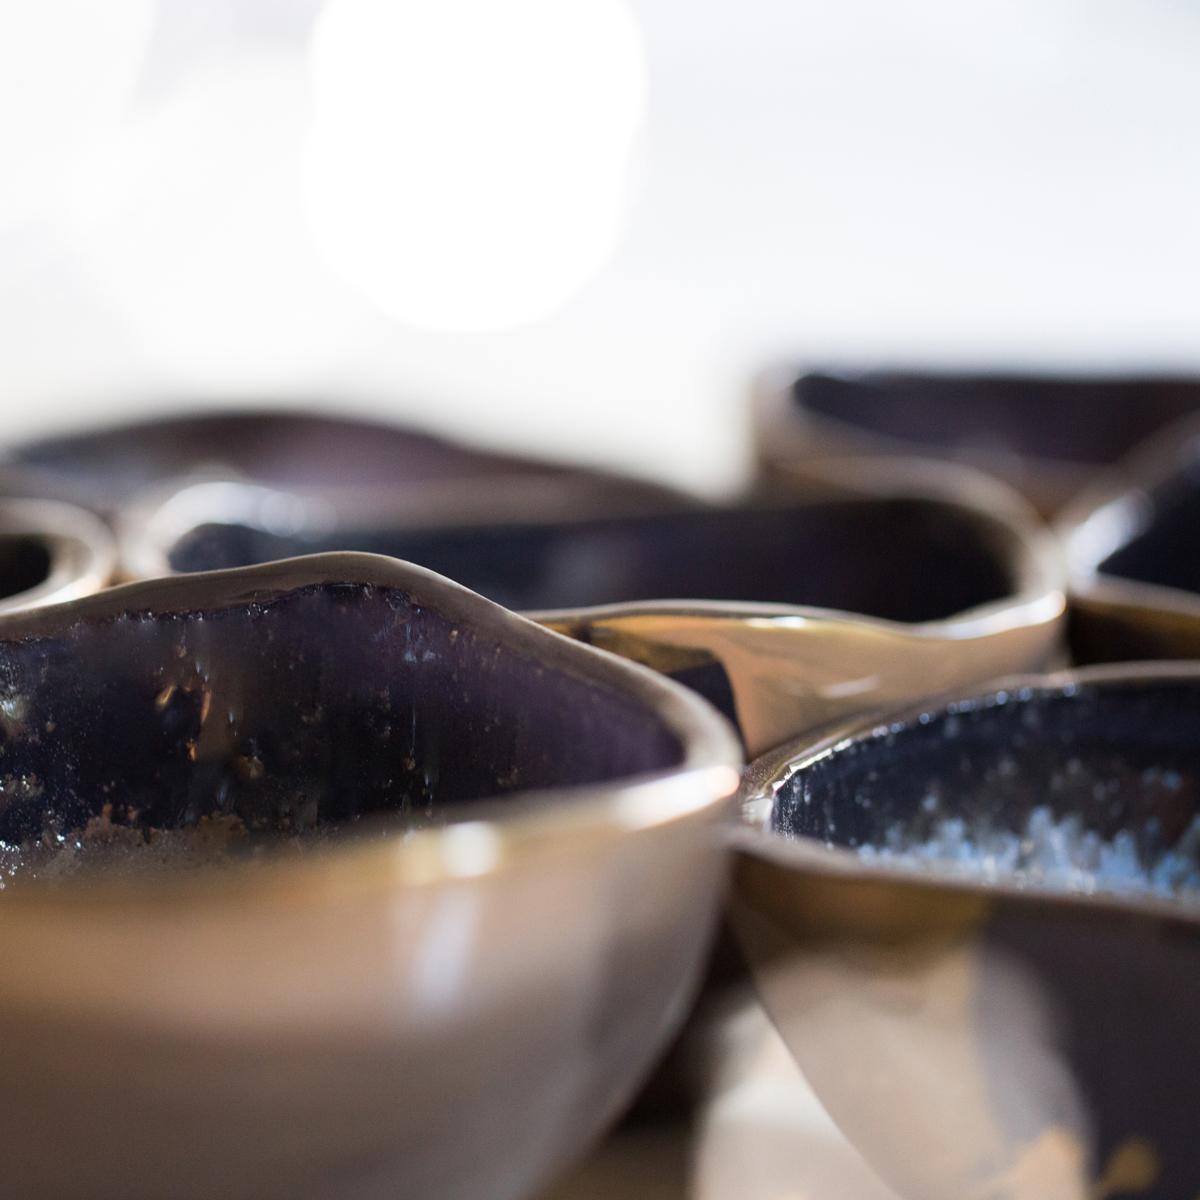 anna tableware designer, Reese is a bowl artistically designed with a mix of mysterious deep night blue and royal matte gold colours